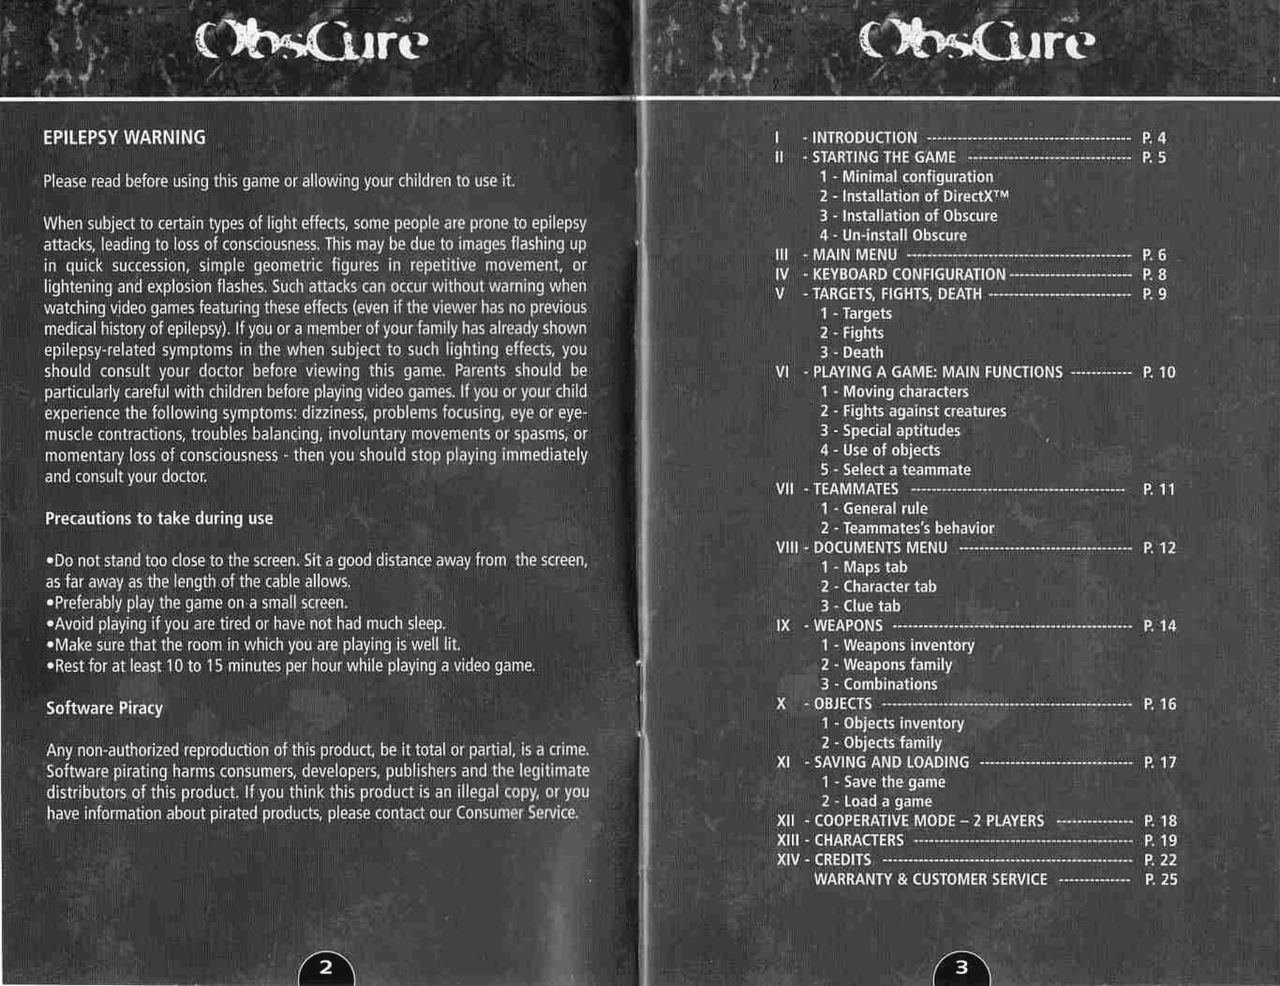 Obscure (PC (DOS/Windows)) Game Manual 2